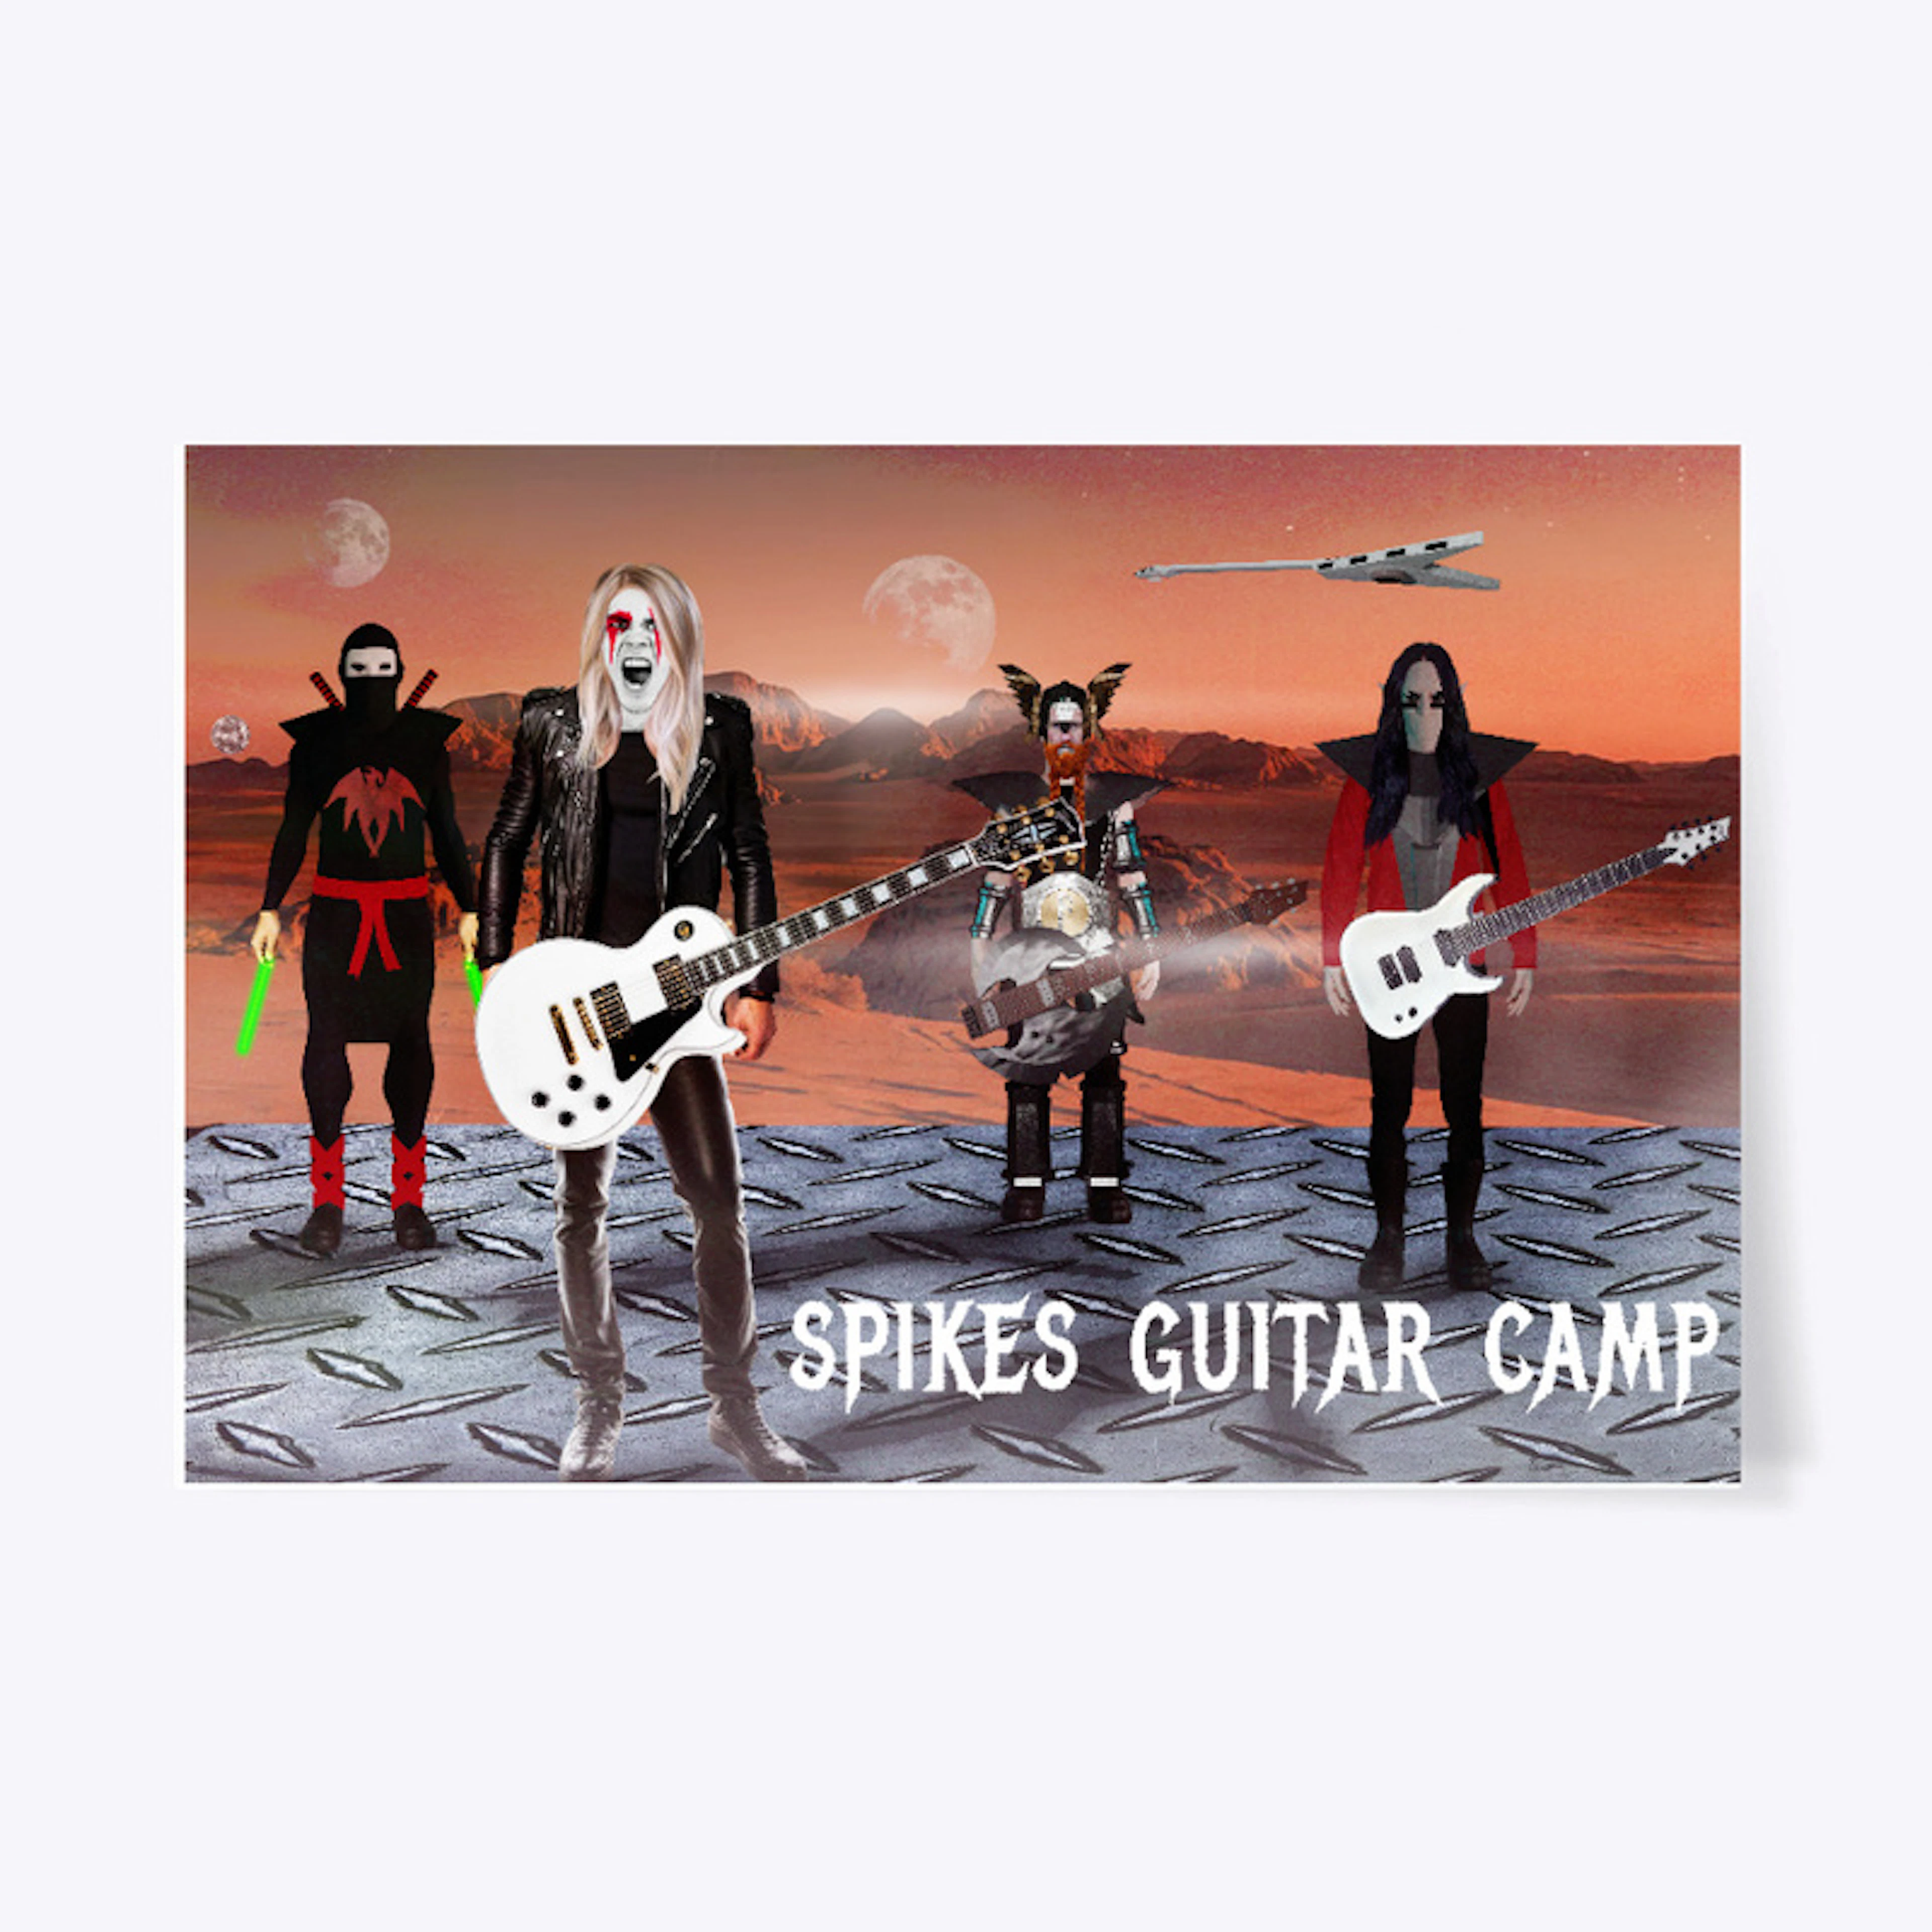 SPIKE'S GUITAR CAMP - POSTER